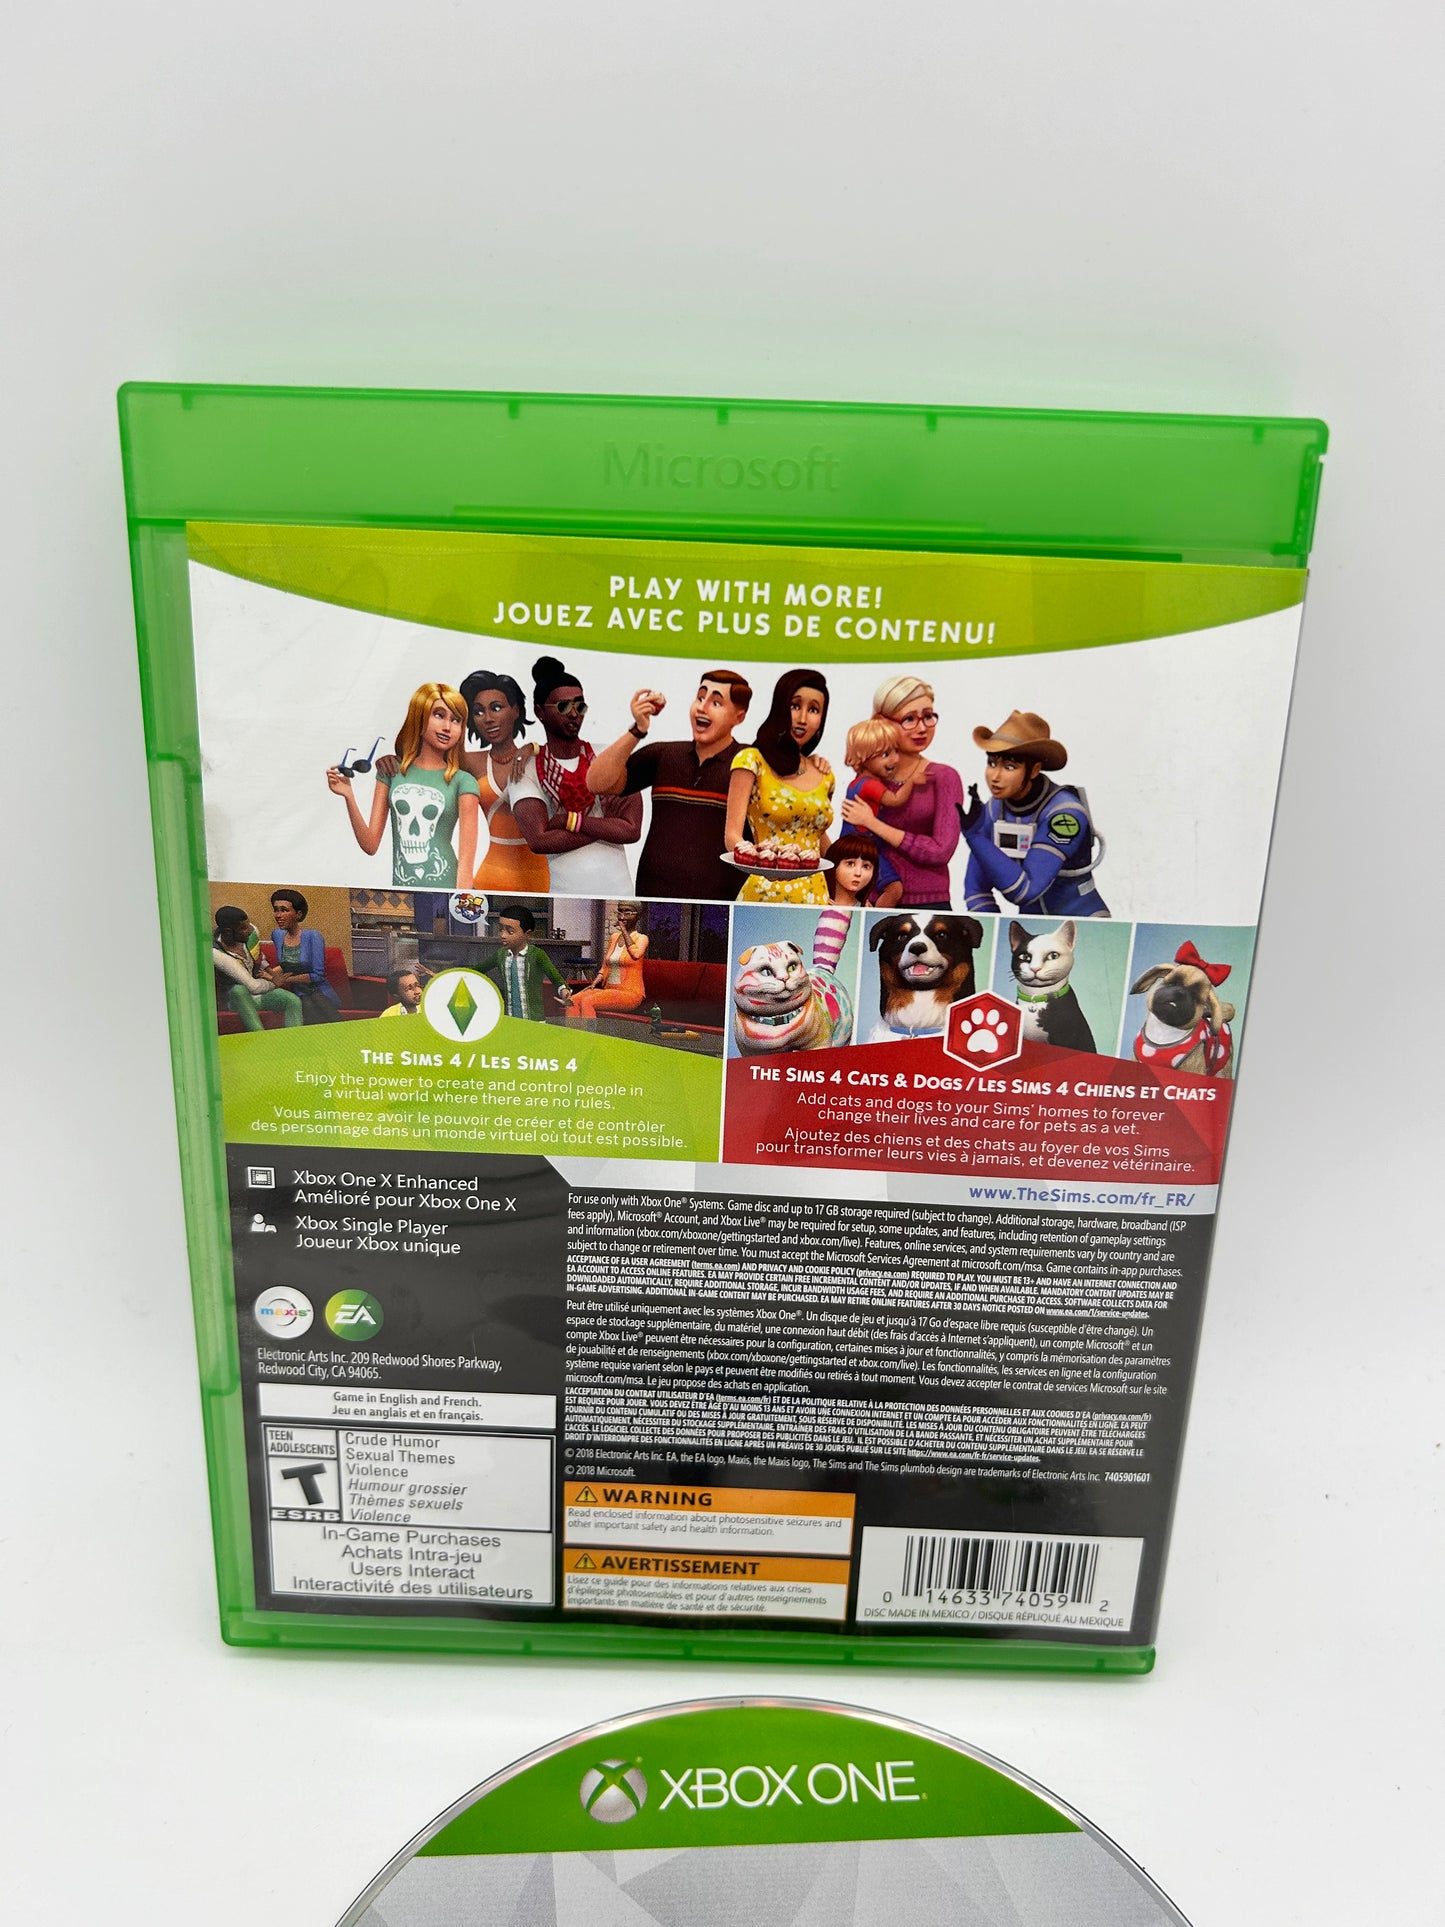 MiCROSOFT XBOX ONE | THE SiMS 4 CATS AND DOGS | BUNDLE COLLECTiON